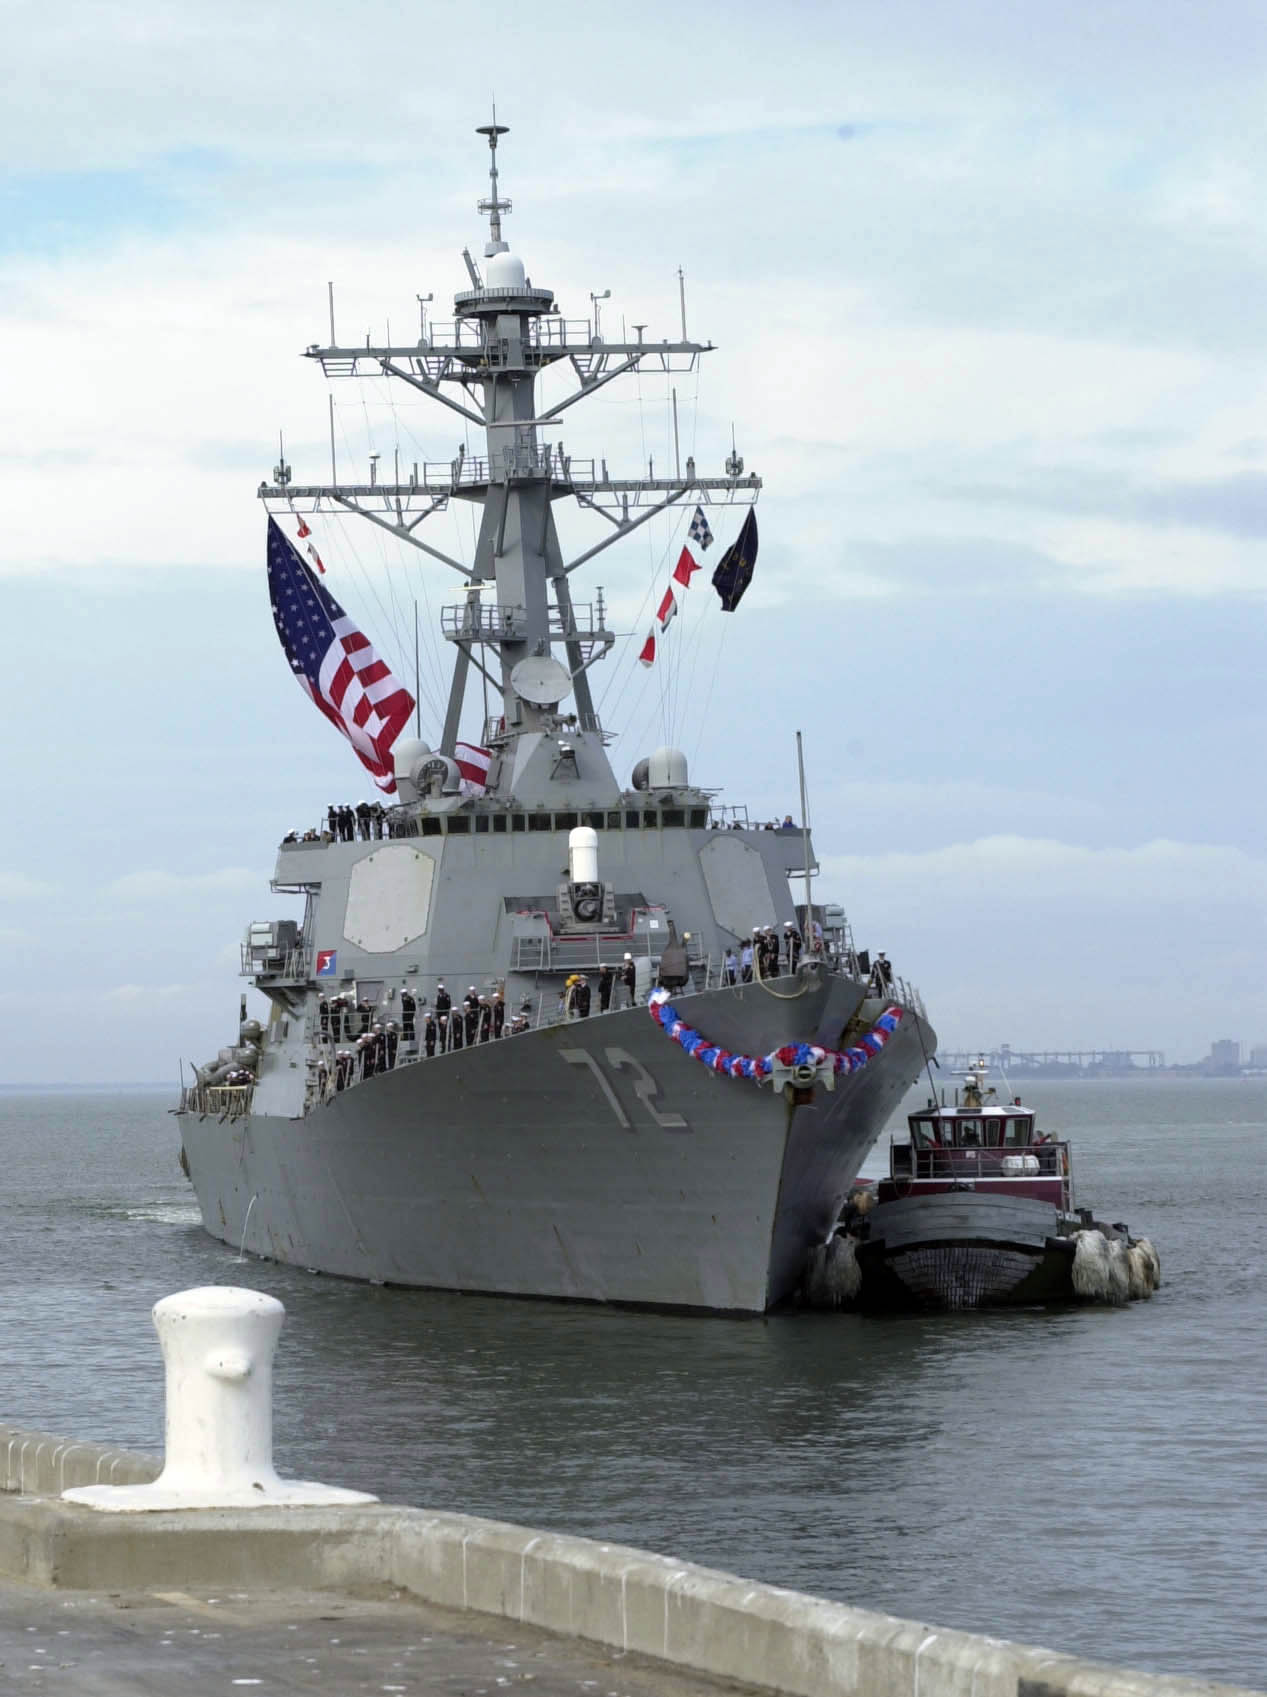 US_Navy_051115-N-6764G-002_The_guided_missile_destroyer_USS_Mahan_%28DDG_72%29_returns_to_Naval_Station_Norfolk%2C_Va.%2C_following_a_regularly_scheduled_six-month_deployment_in_support_of_the_Global_War_on_Terrorism.jpg